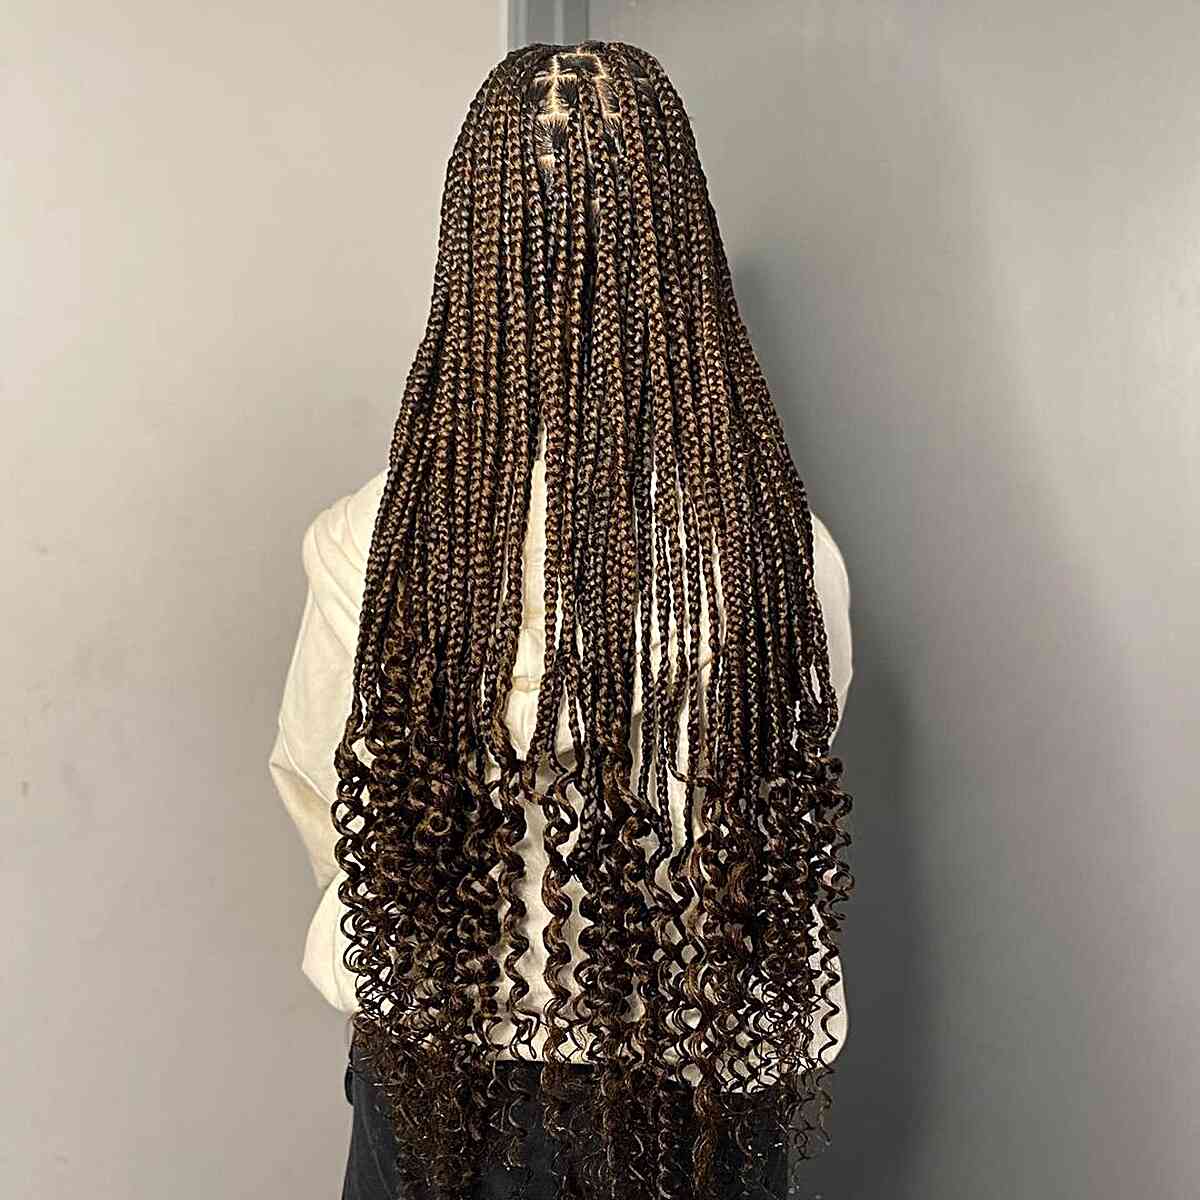 Butt-Length Dark Brown Smaller Knotless Braids with Curls on Ends